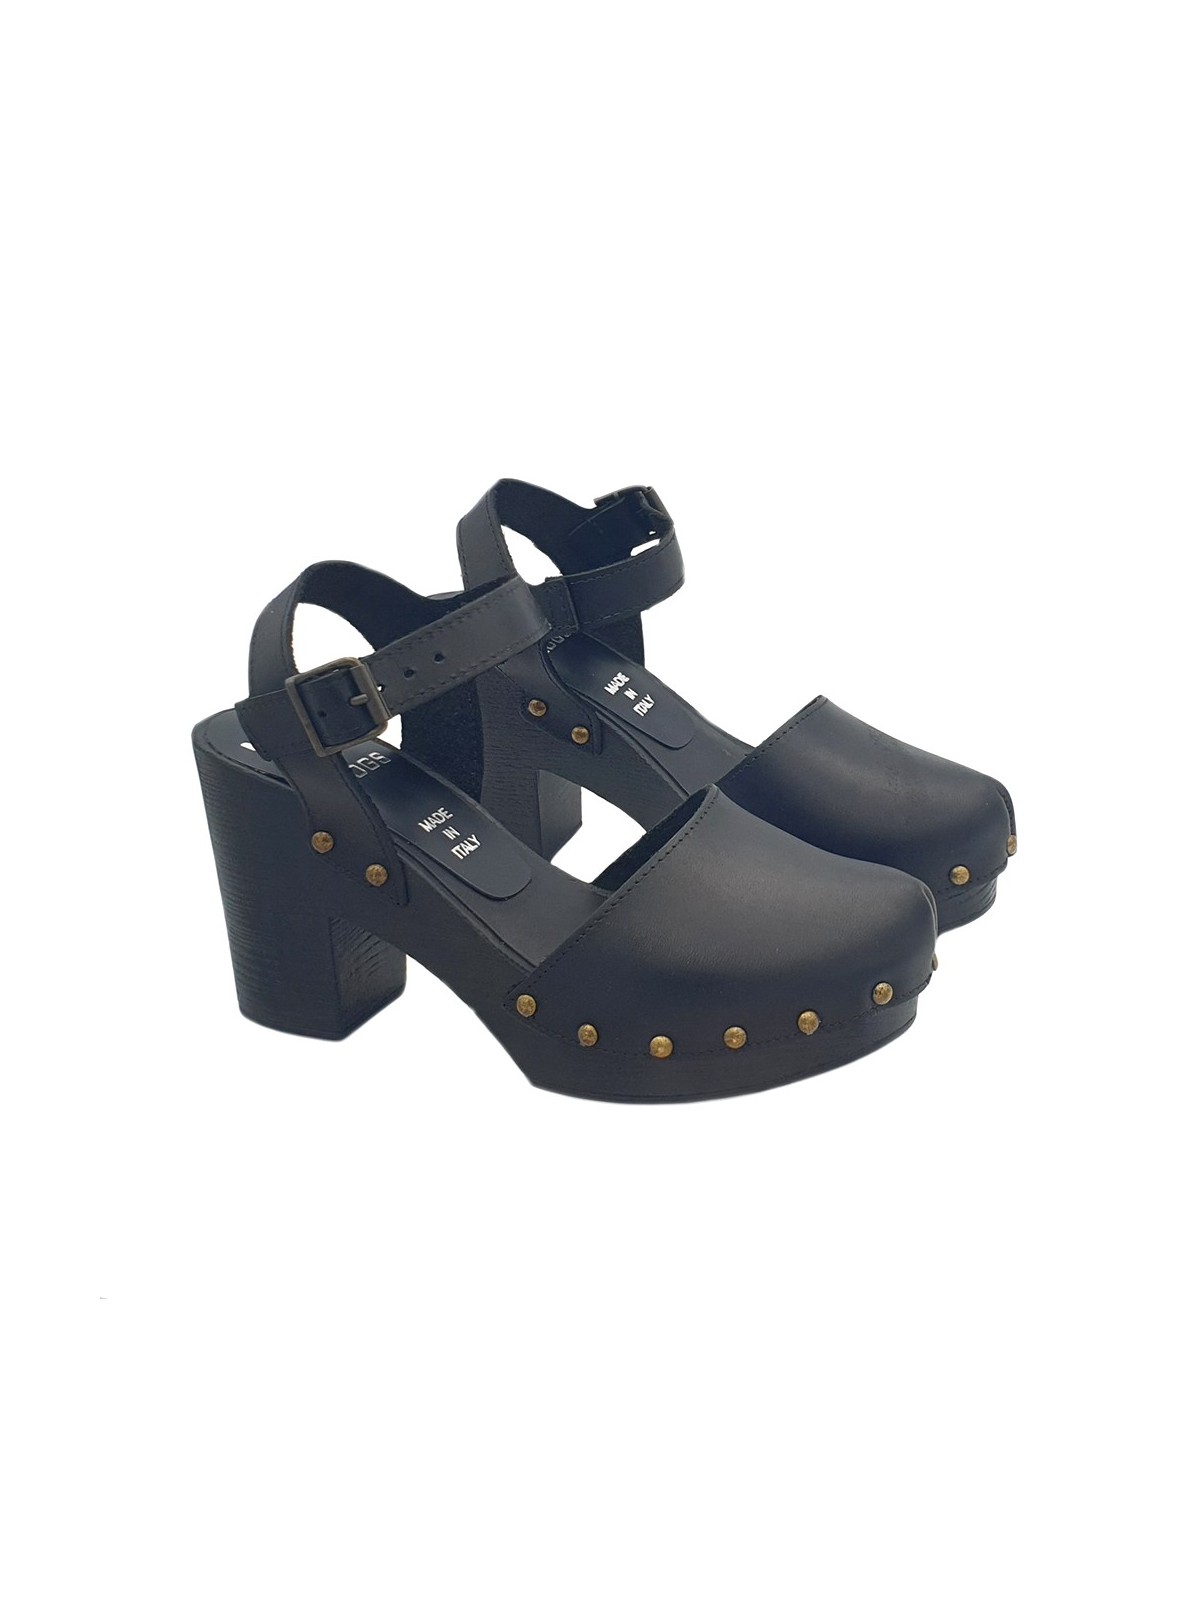 BLACK CLOSED SWEDISH CLOGS WITH HEEL AND STRAP